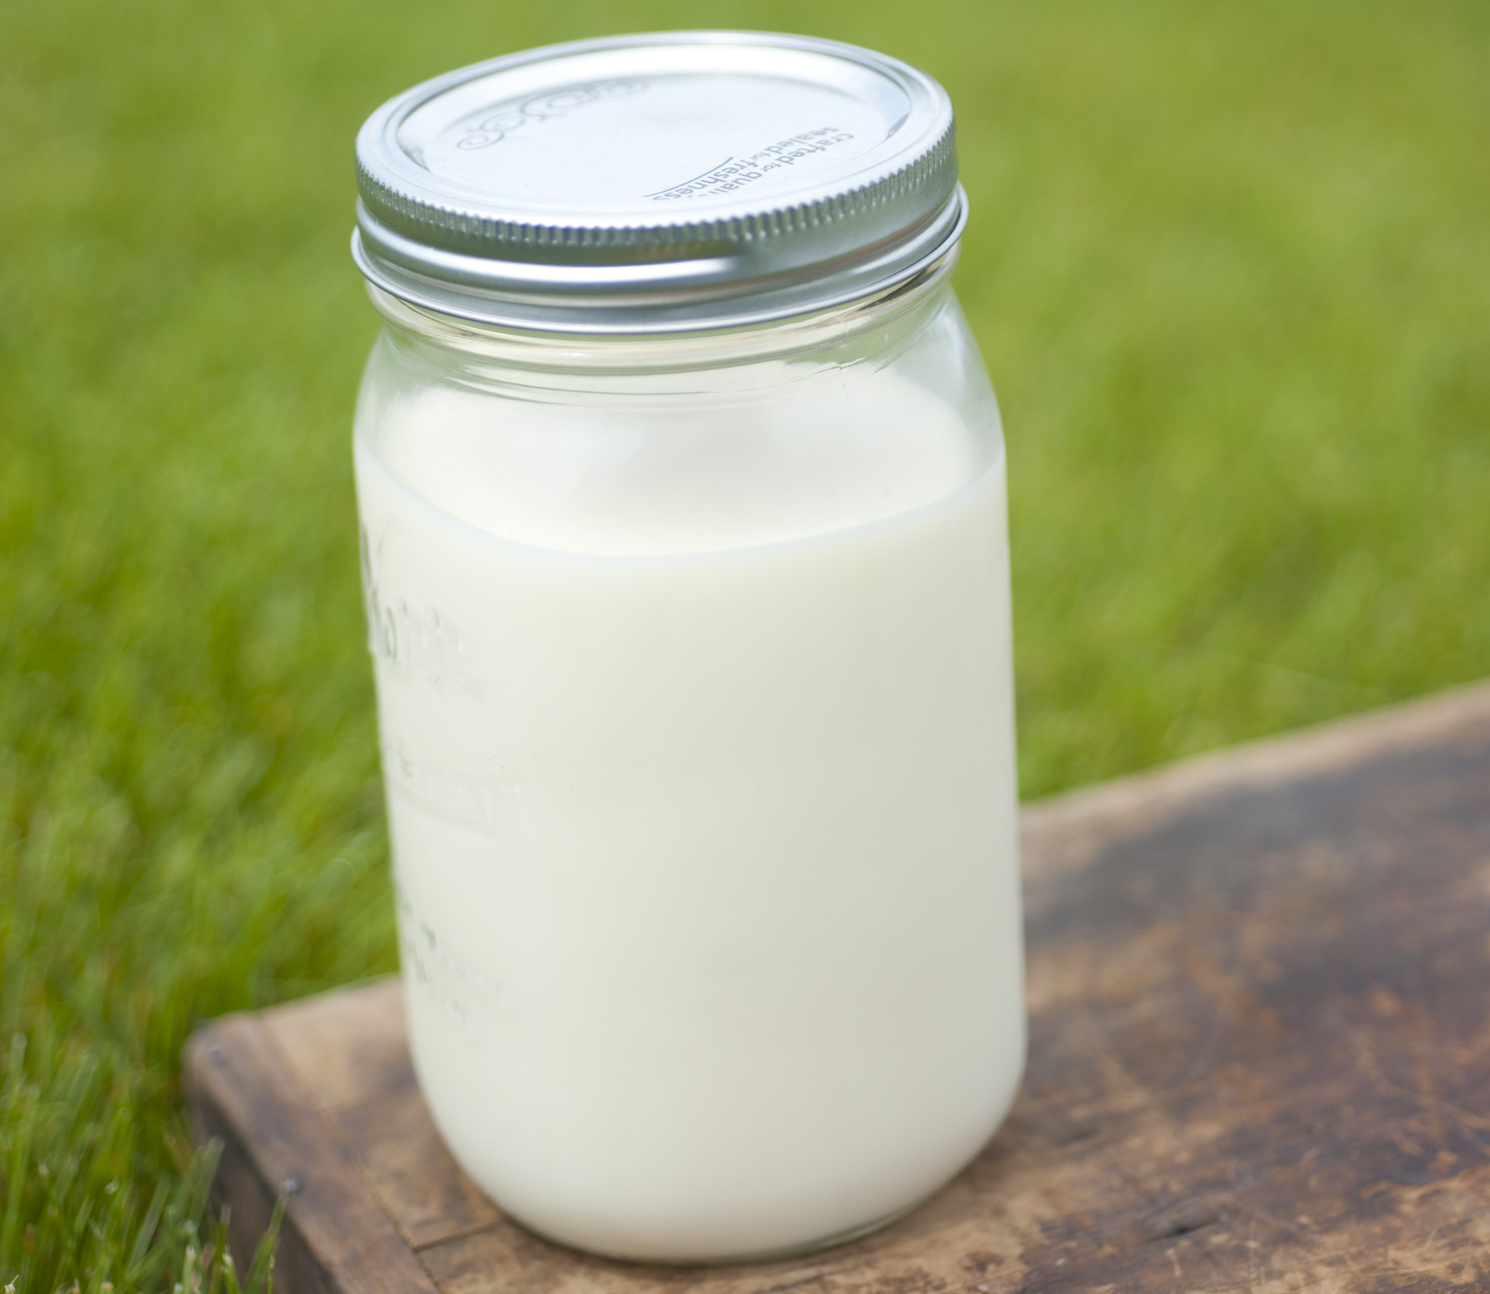 The raw milk debate continues in Idaho with many dairy farms producing unpasteurized milk.